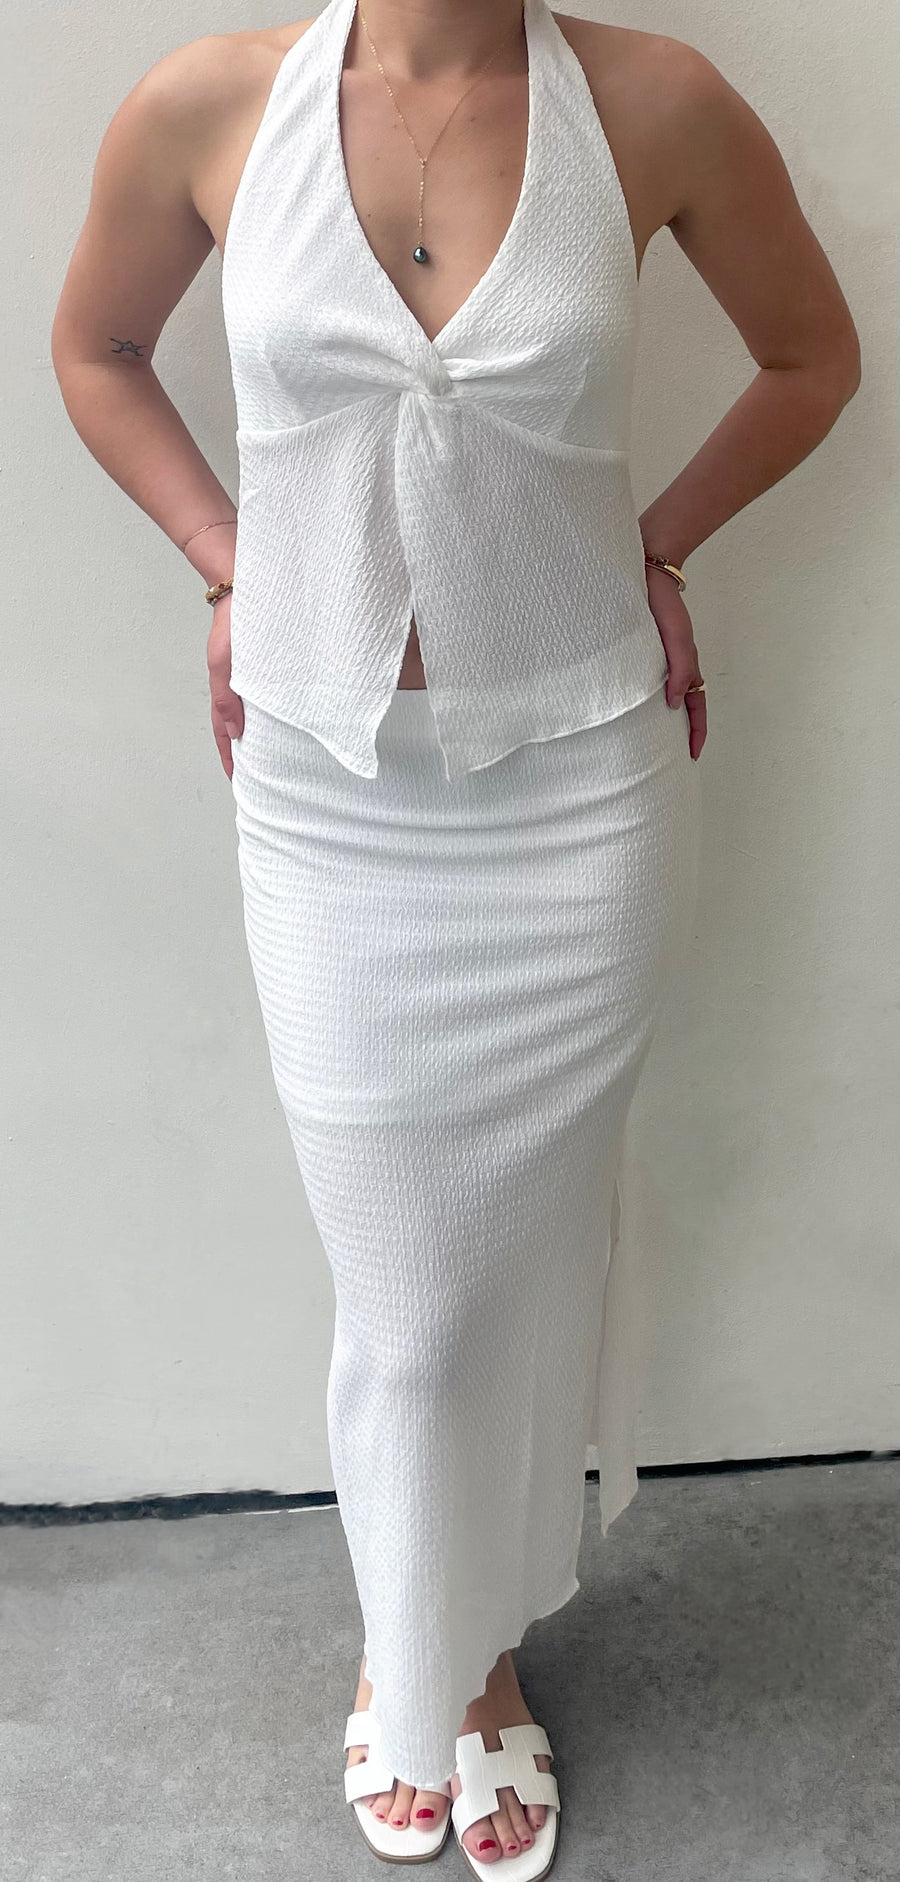 Featuring a Midi skirt with a built in slip and side slit detail in the color white 